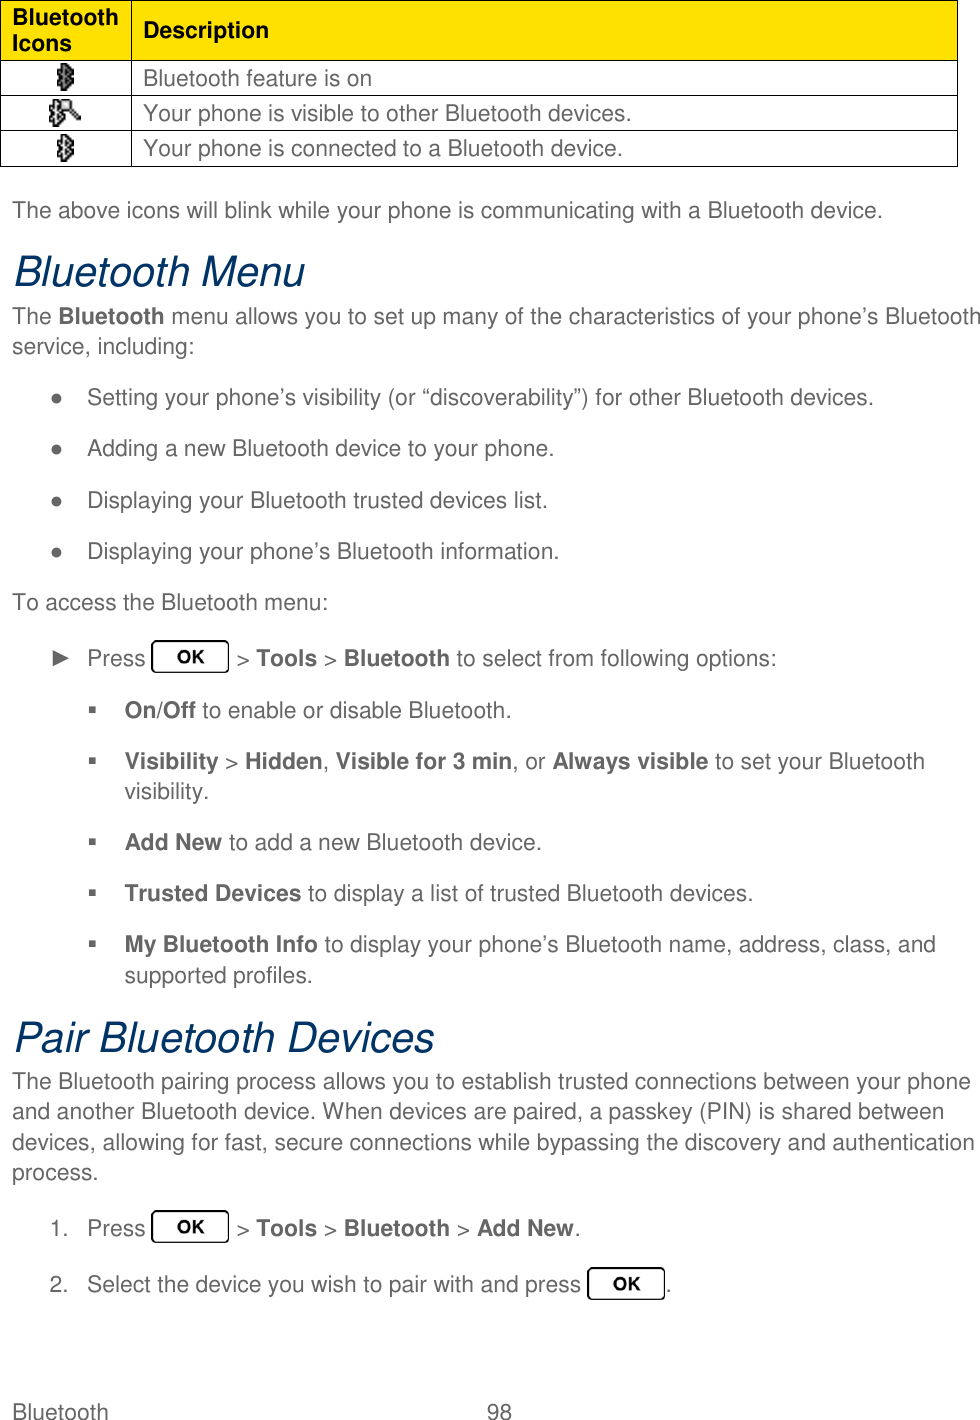 Bluetooth  98   Bluetooth Icons Description  Bluetooth feature is on  Your phone is visible to other Bluetooth devices.  Your phone is connected to a Bluetooth device.  The above icons will blink while your phone is communicating with a Bluetooth device. Bluetooth Menu The Bluetooth menu allows you to set up many of the characteristics of your phone’s Bluetooth service, including: ●  Setting your phone’s visibility (or “discoverability”) for other Bluetooth devices. ●  Adding a new Bluetooth device to your phone. ●  Displaying your Bluetooth trusted devices list. ●  Displaying your phone’s Bluetooth information. To access the Bluetooth menu: ►  Press   &gt; Tools &gt; Bluetooth to select from following options:  On/Off to enable or disable Bluetooth.  Visibility &gt; Hidden, Visible for 3 min, or Always visible to set your Bluetooth visibility.  Add New to add a new Bluetooth device.  Trusted Devices to display a list of trusted Bluetooth devices.  My Bluetooth Info to display your phone’s Bluetooth name, address, class, and supported profiles. Pair Bluetooth Devices The Bluetooth pairing process allows you to establish trusted connections between your phone and another Bluetooth device. When devices are paired, a passkey (PIN) is shared between devices, allowing for fast, secure connections while bypassing the discovery and authentication process. 1.  Press   &gt; Tools &gt; Bluetooth &gt; Add New. 2.  Select the device you wish to pair with and press  . 